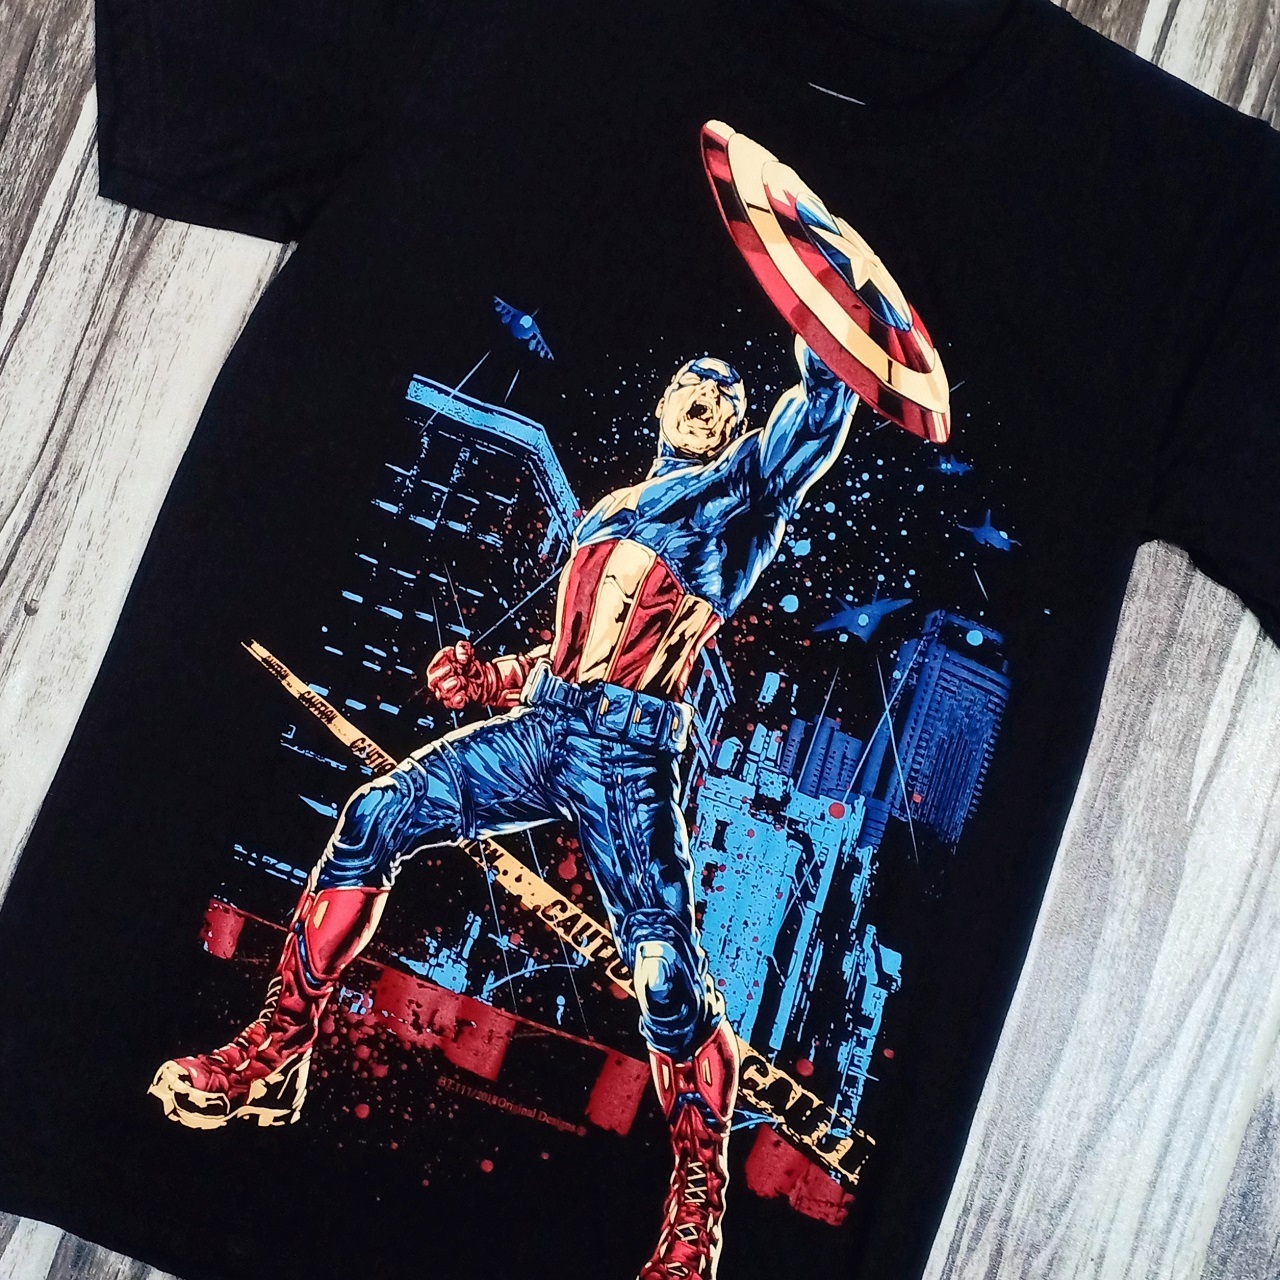 BT111 CAPTAIN SYSTEM STORE SCREEN GRADE SPEED TIMBER STEVE AMERICA EDITION ROGERS PREMIUM TSHIRT HERO BLACK T-SHIRT SILK QUALITY TIMBER TYPE HIGH BLACK MARVEL MOVIE COTTON NEW COLLECTABLE MOAI – COLLECTABLE AVENGERS